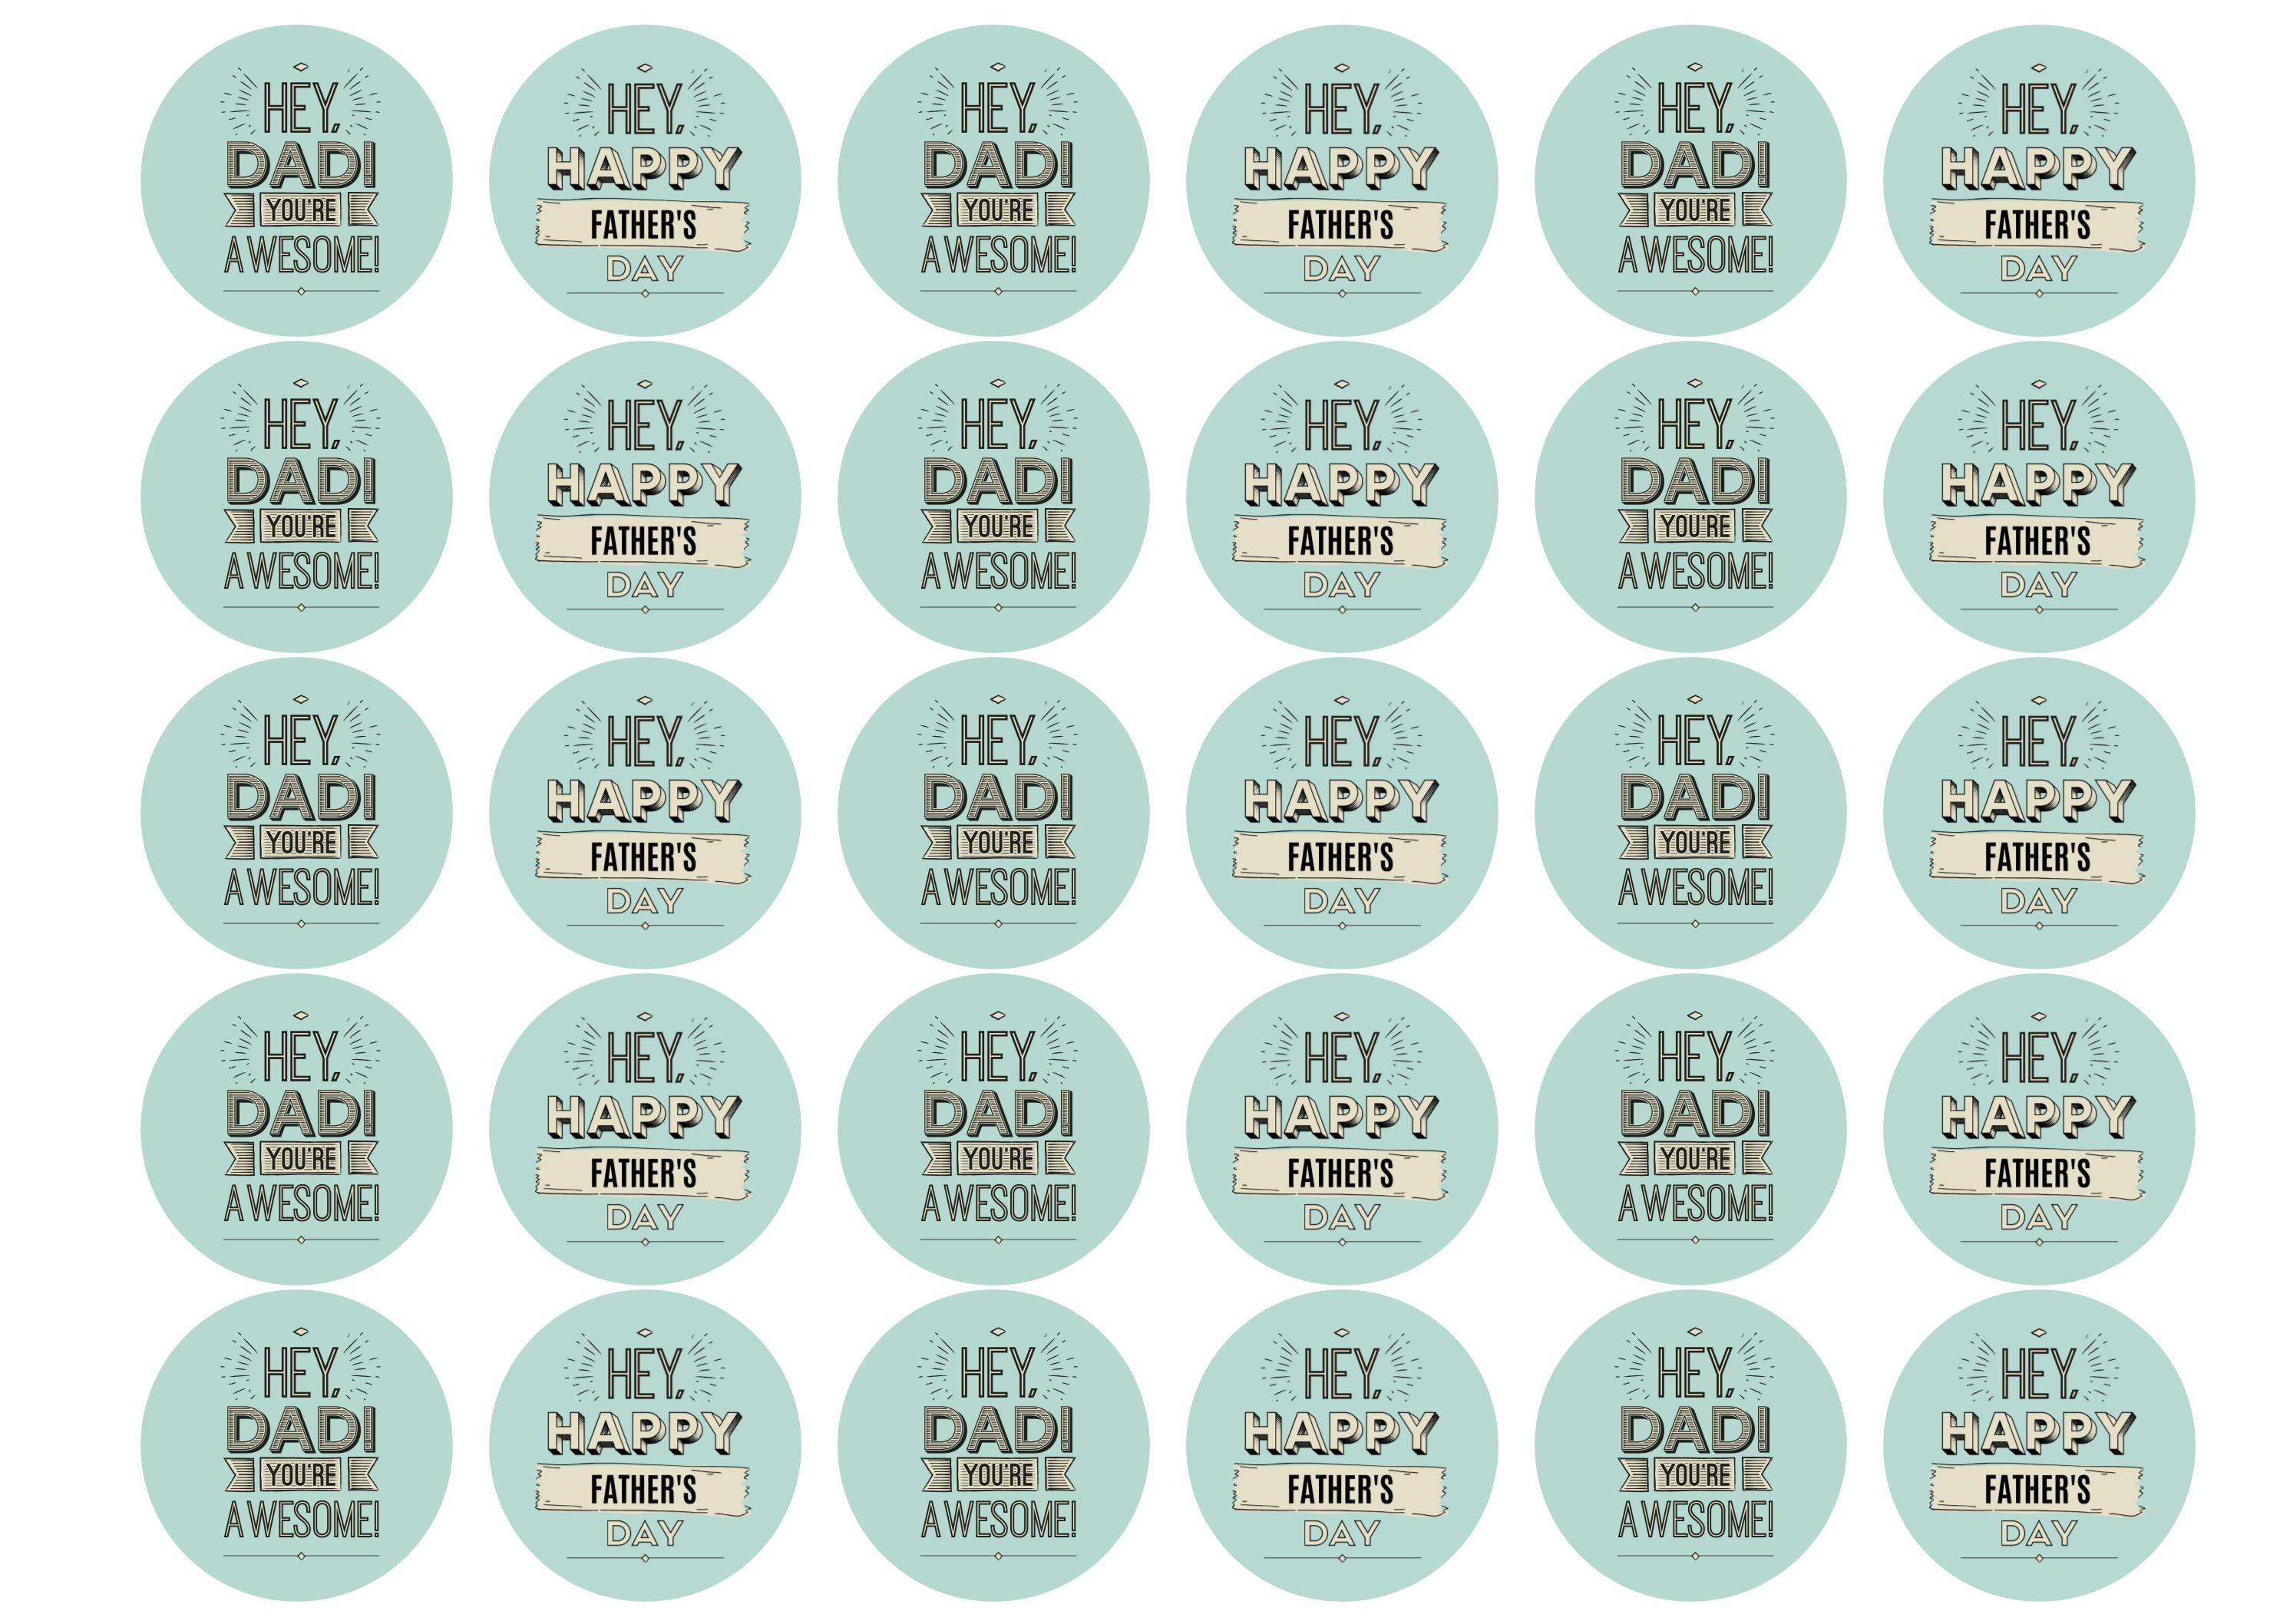 30 edible cupcake toppers with images for Father's Day